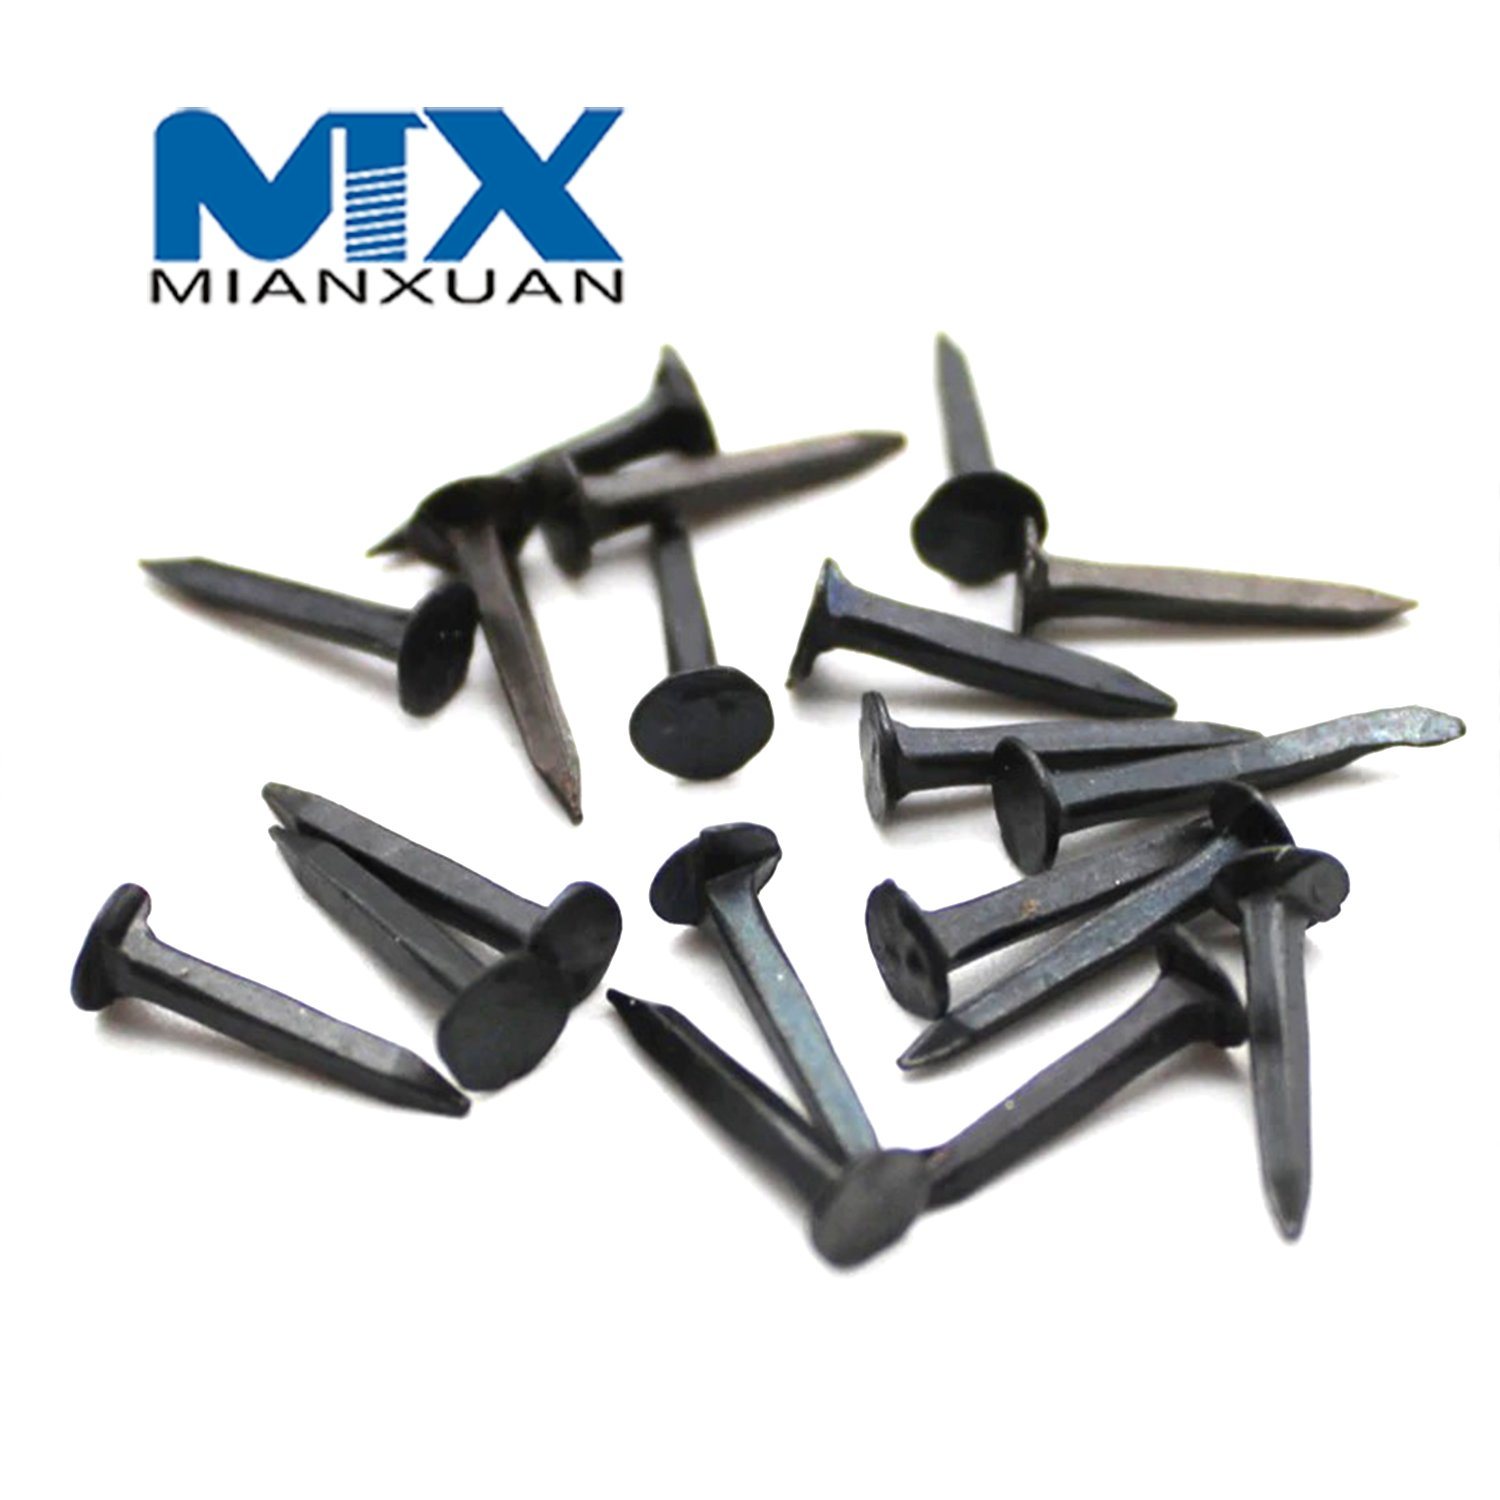 Wholesale Hardware Stainless Steel Screws and Round Head Shoe Tacks Nails